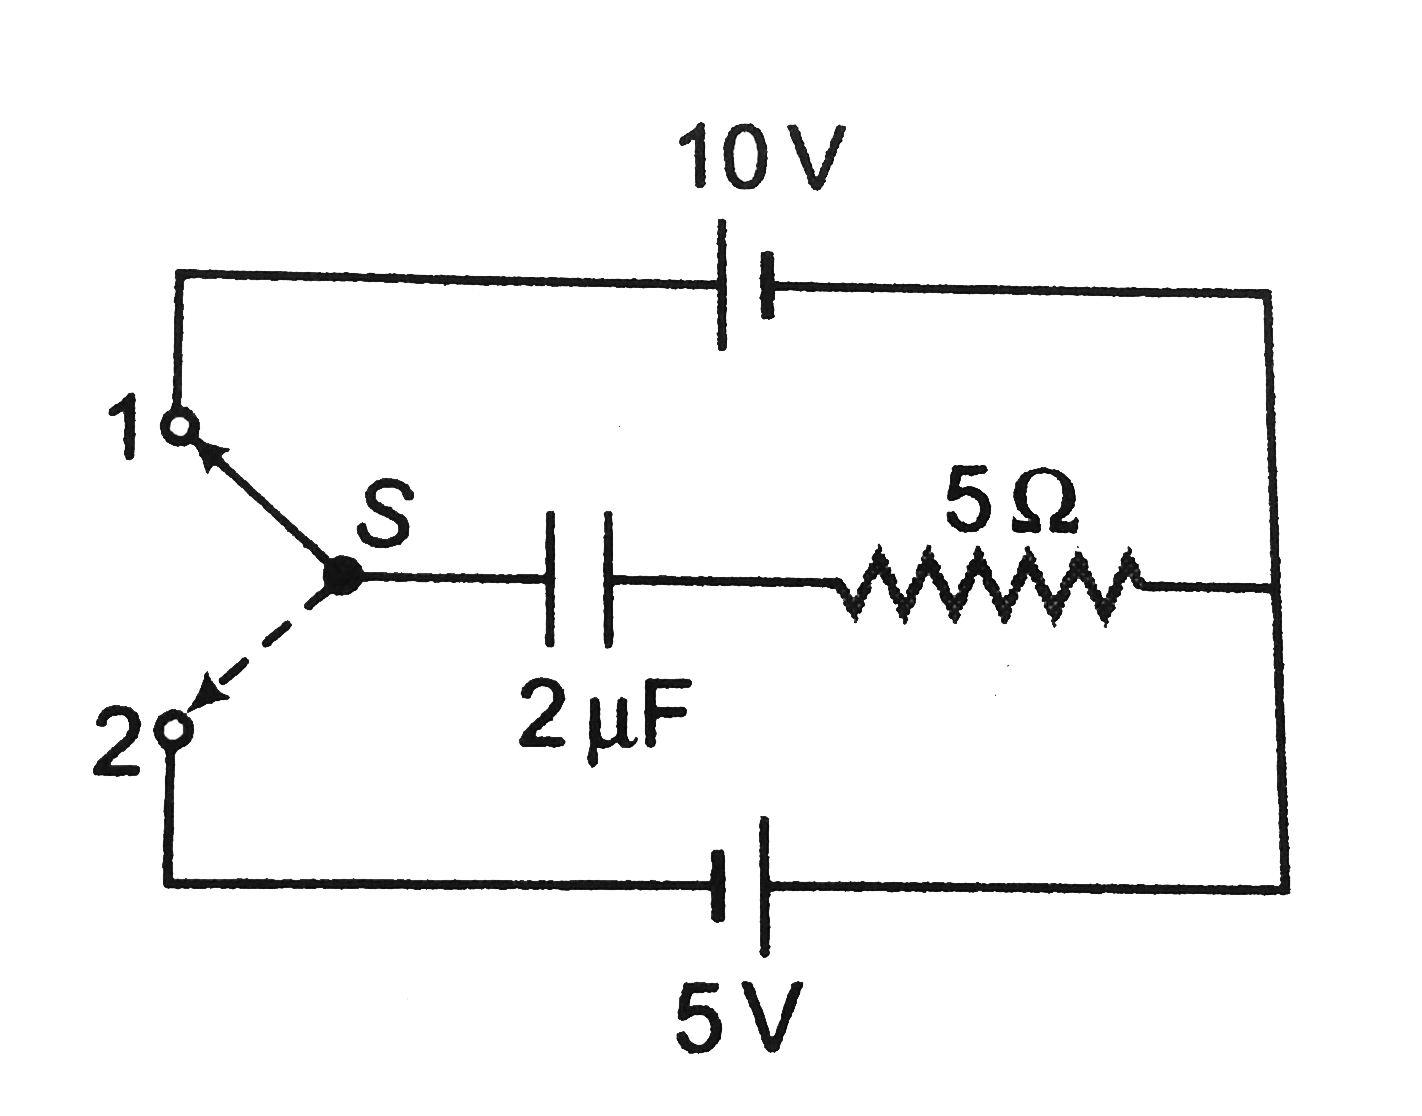 In the circuit shown in figure switch S is thrown to position 1 at t=0. when the current in the resistor is 1A, it is shifted to position 2. the total heat generated in the circuit after shifting to position 2 is